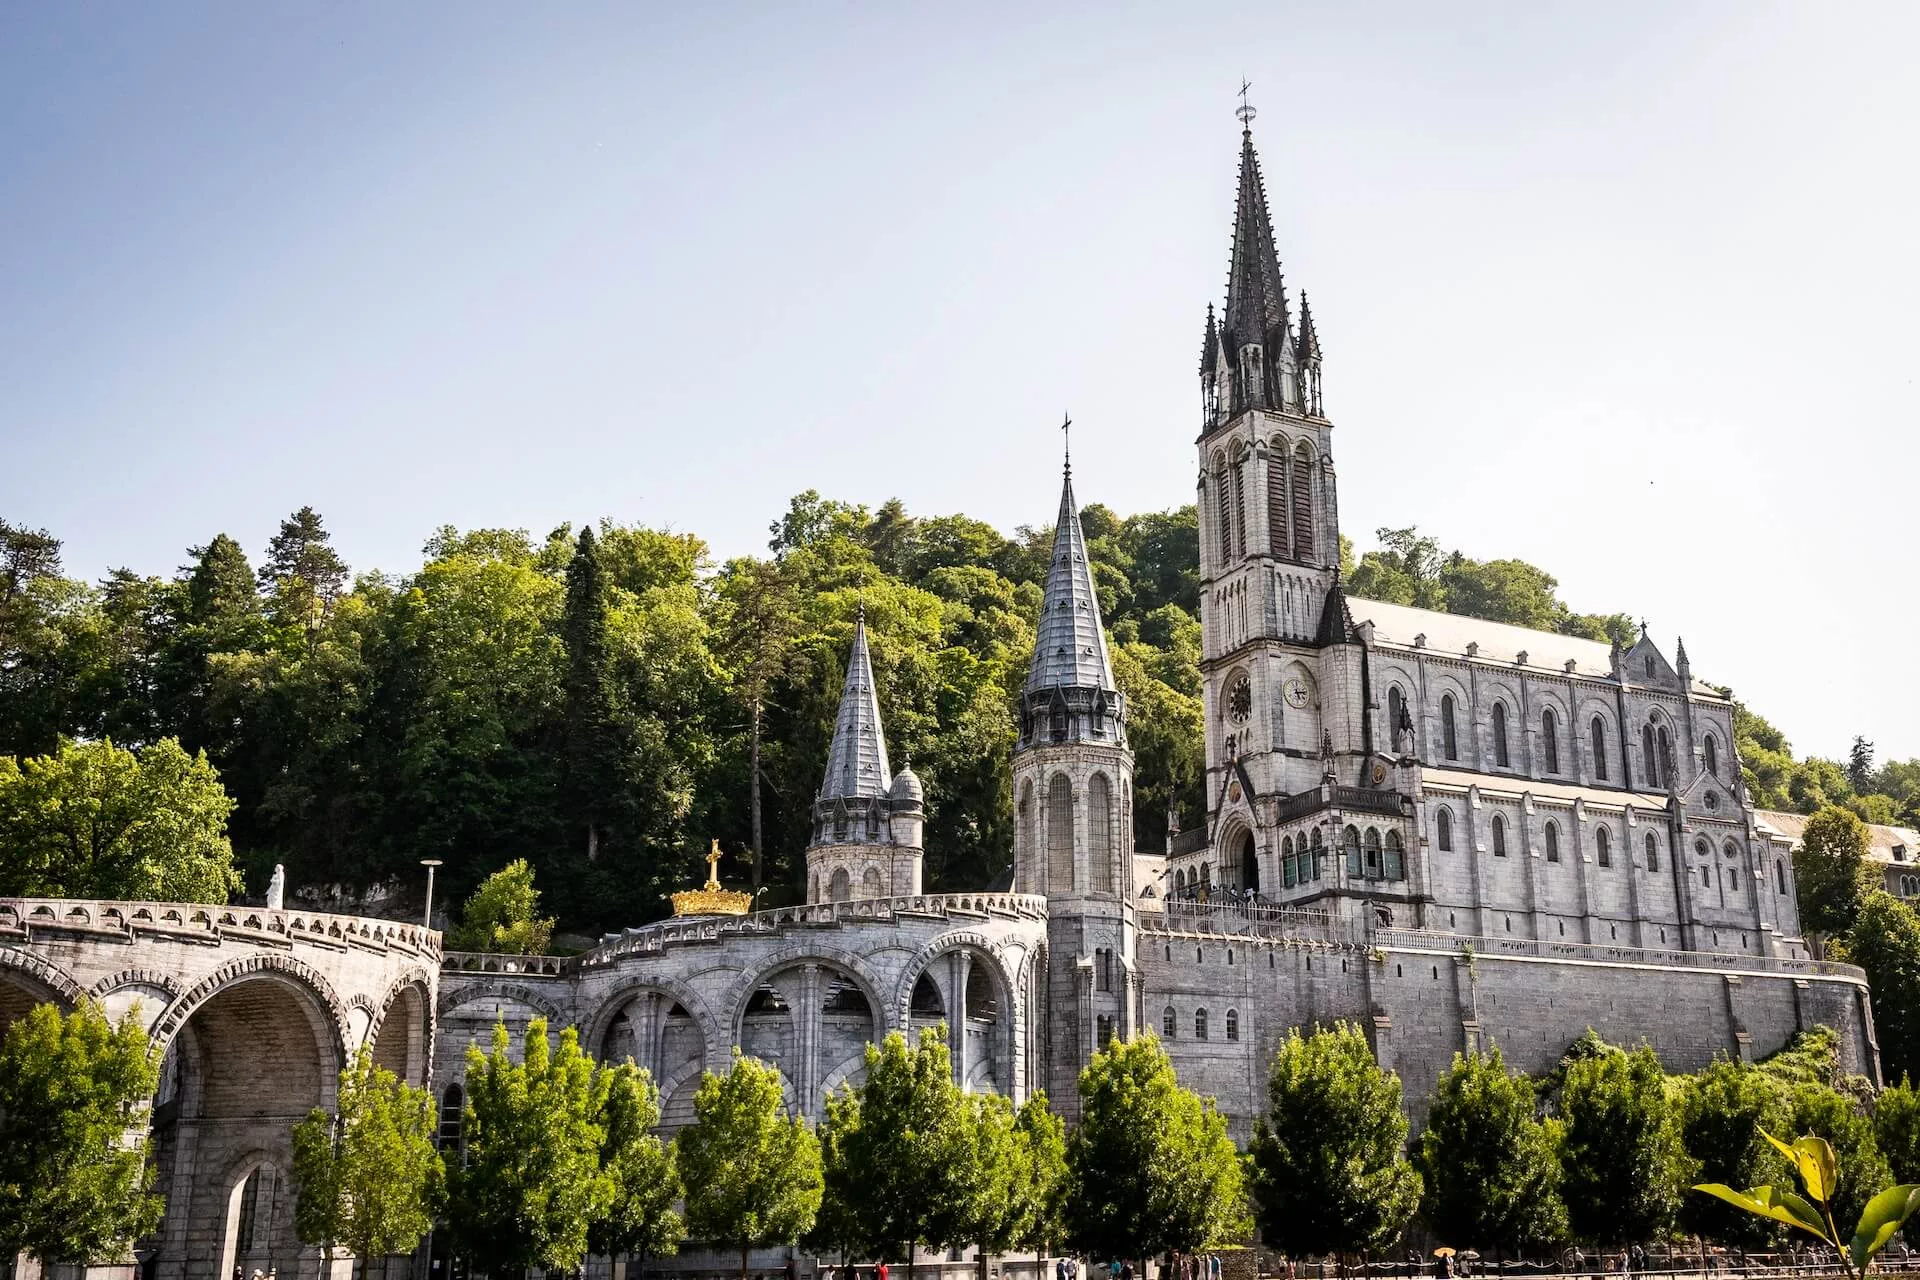 The Basilica of the Immaculate Conception in Lourdes, France